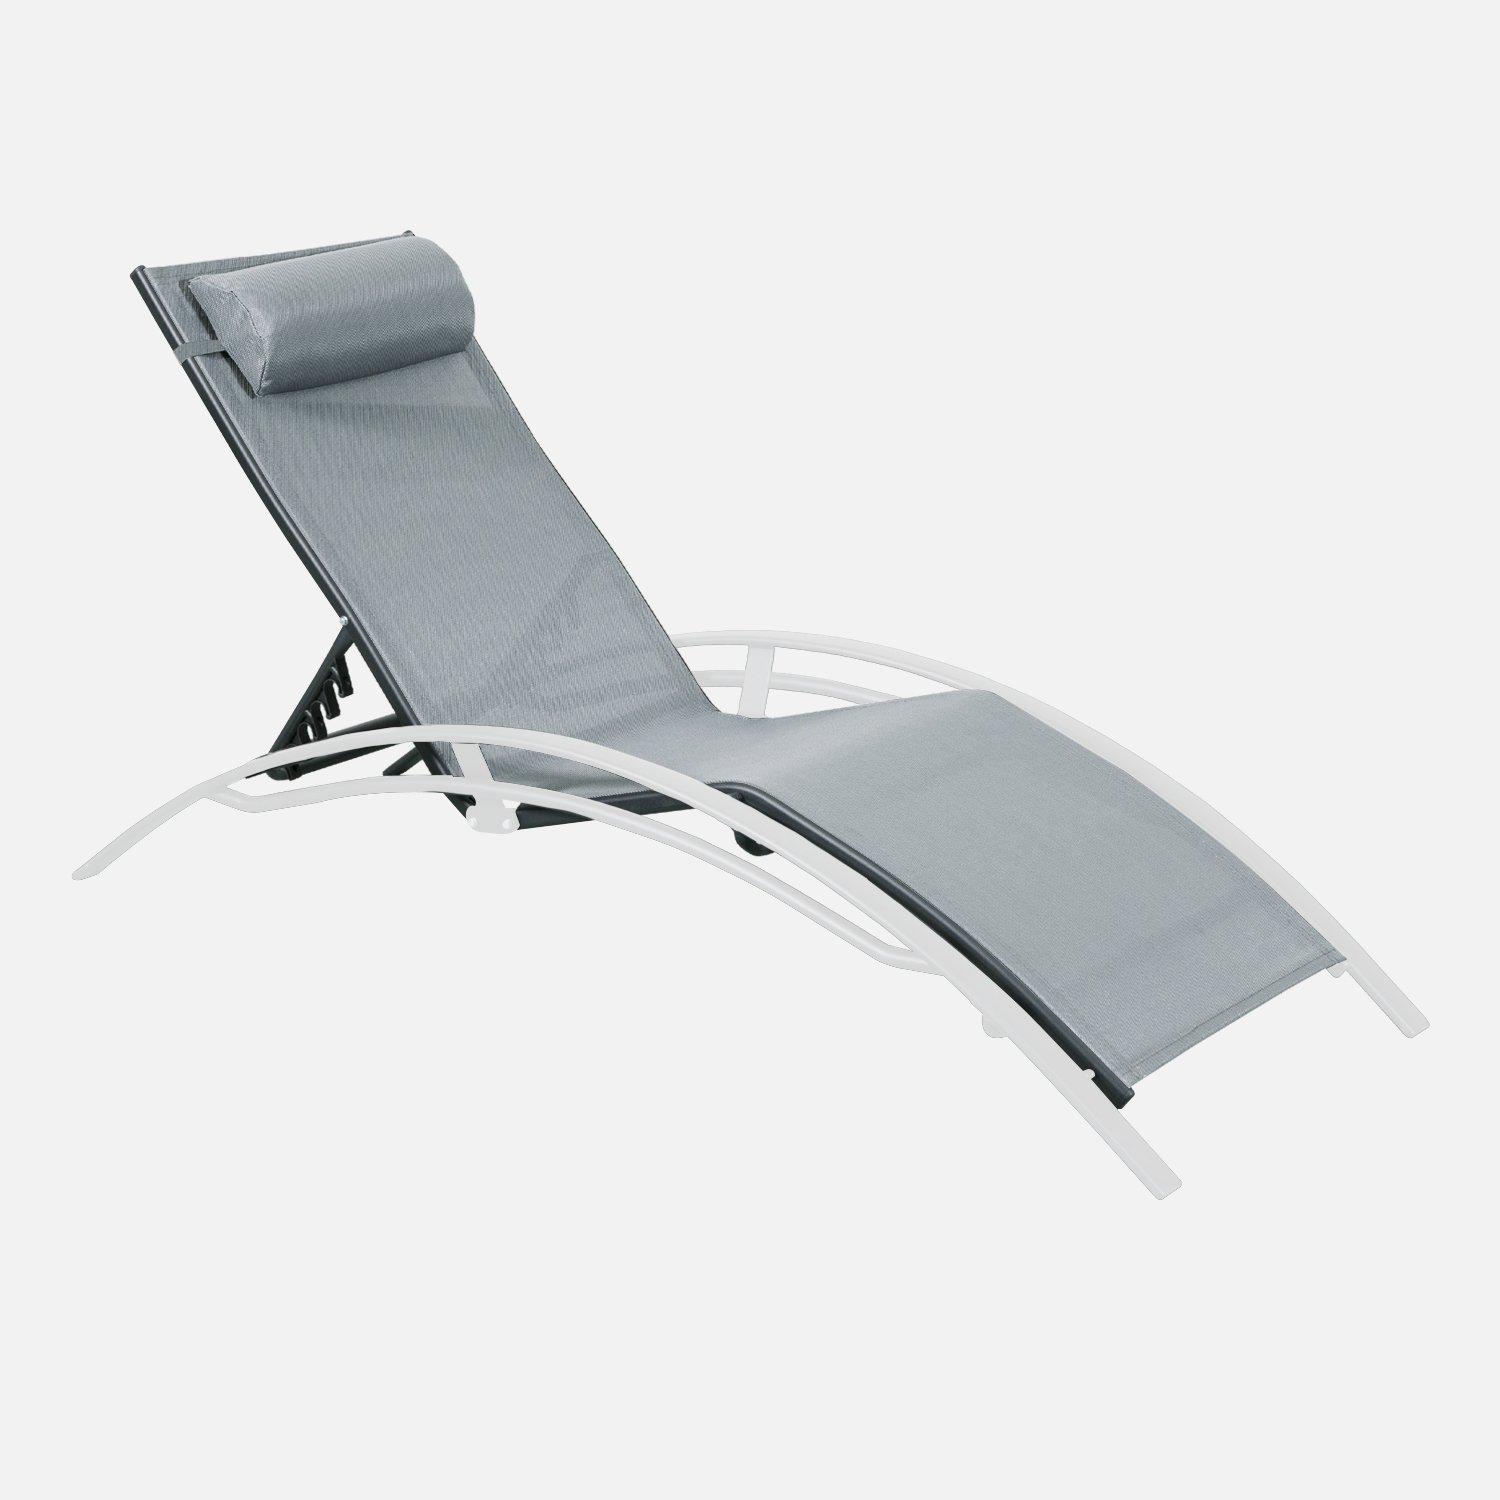 Replacement Seat Back And Fabric For Louisa Sun Lounger